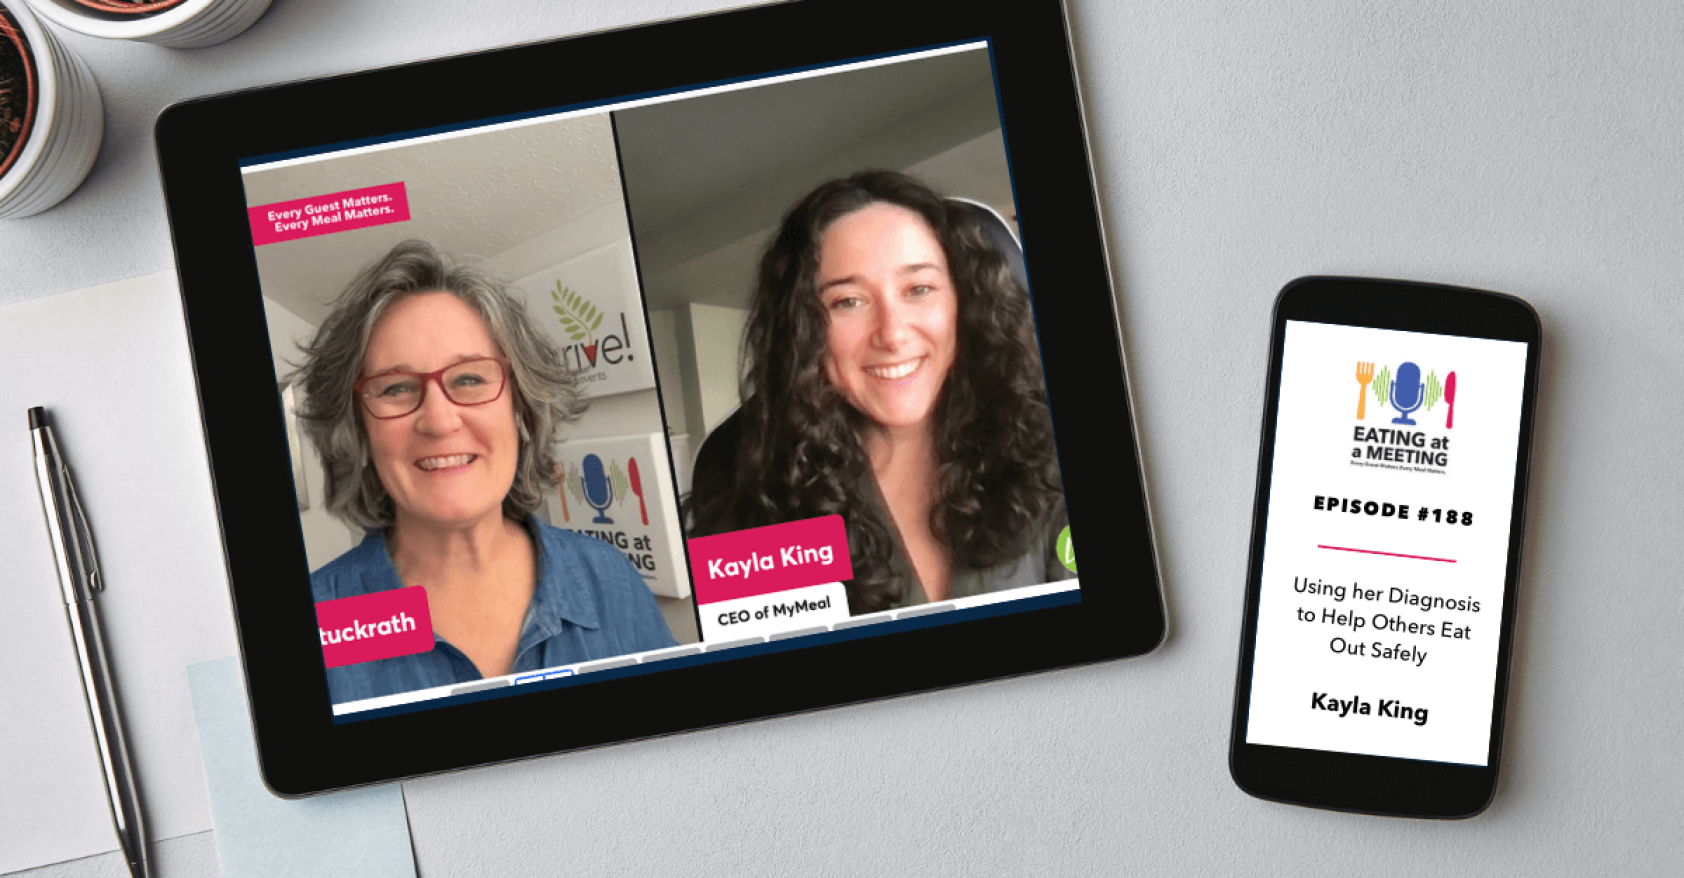 An iPad and iPhone on a table. On the iPad is a picture of a woman and a man who are on video screen. On the iPhone is the Eating at a Meeting podcast logo with Episode #188 Using her Diagnosis to Help Others Eat Out Safely with Kayla King of MyMeal.